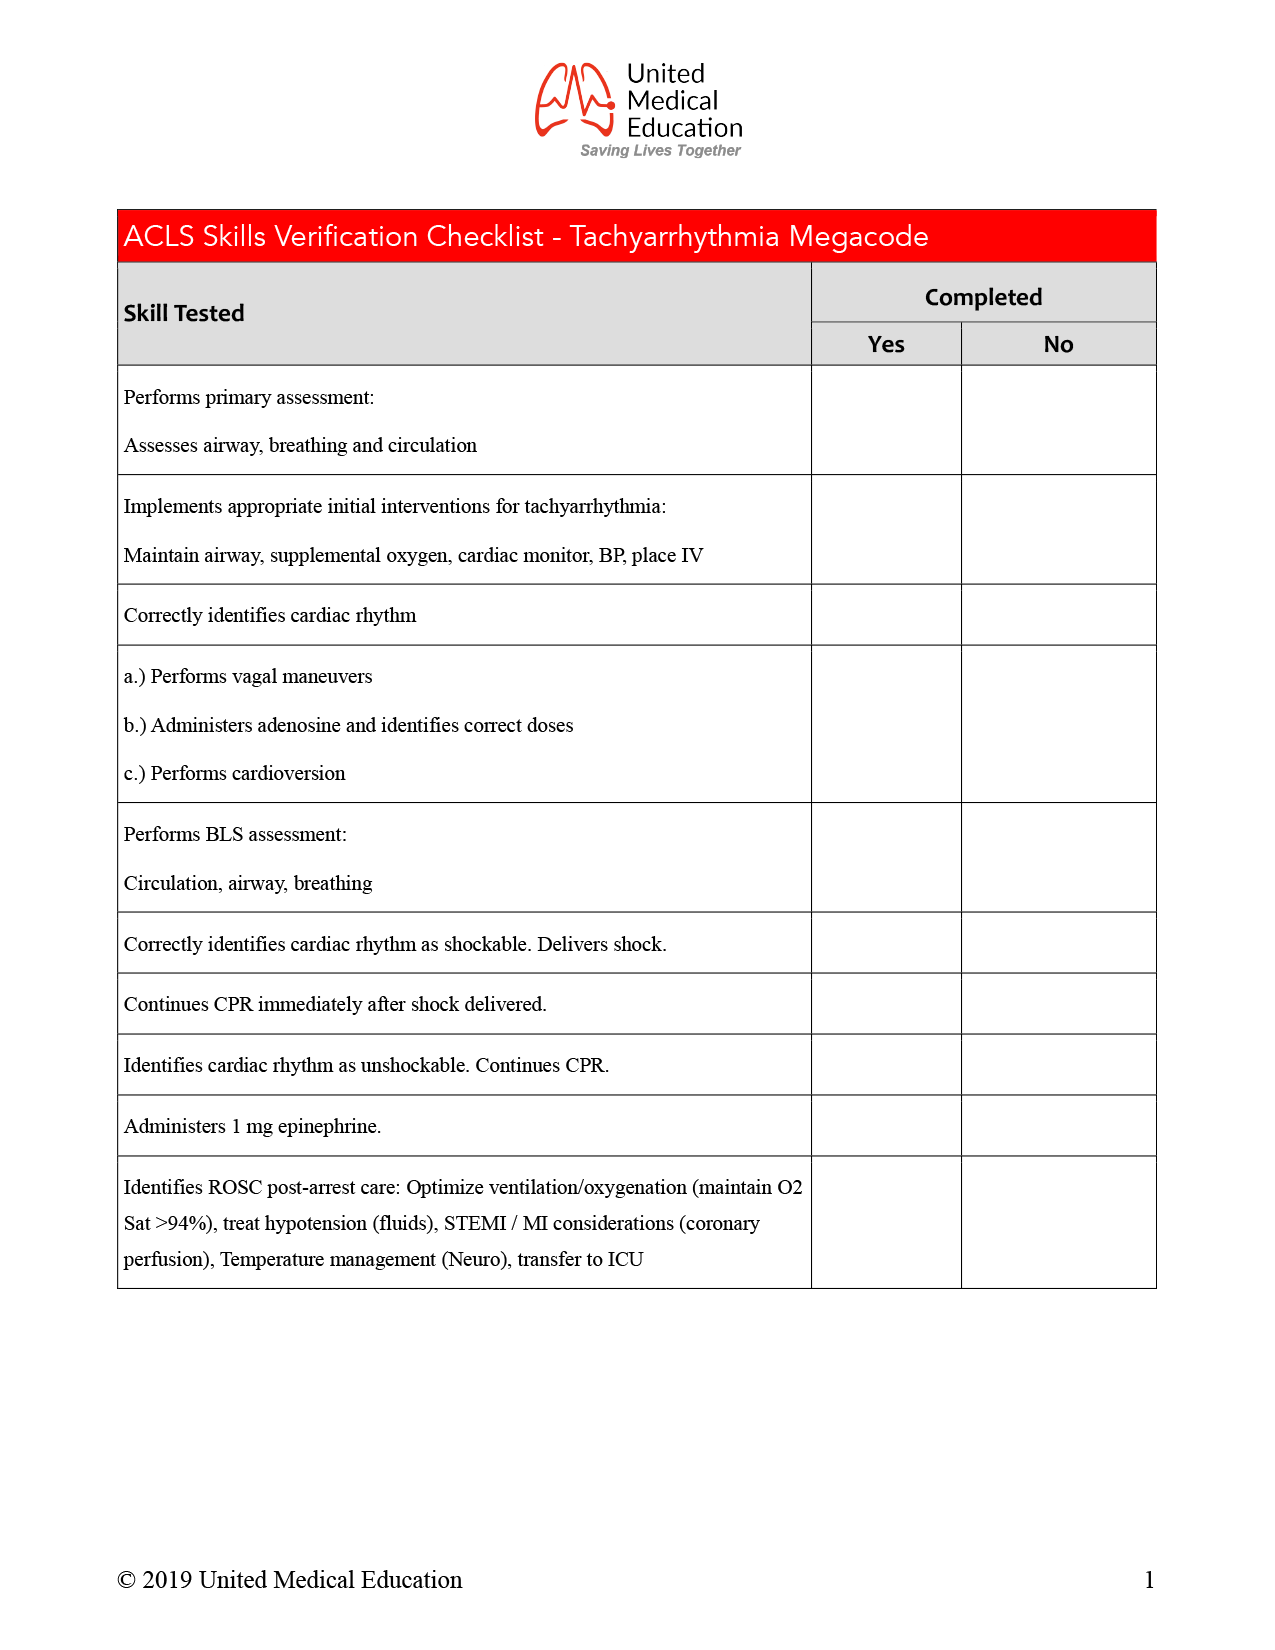 Acls Skills Session Checklist And Guide